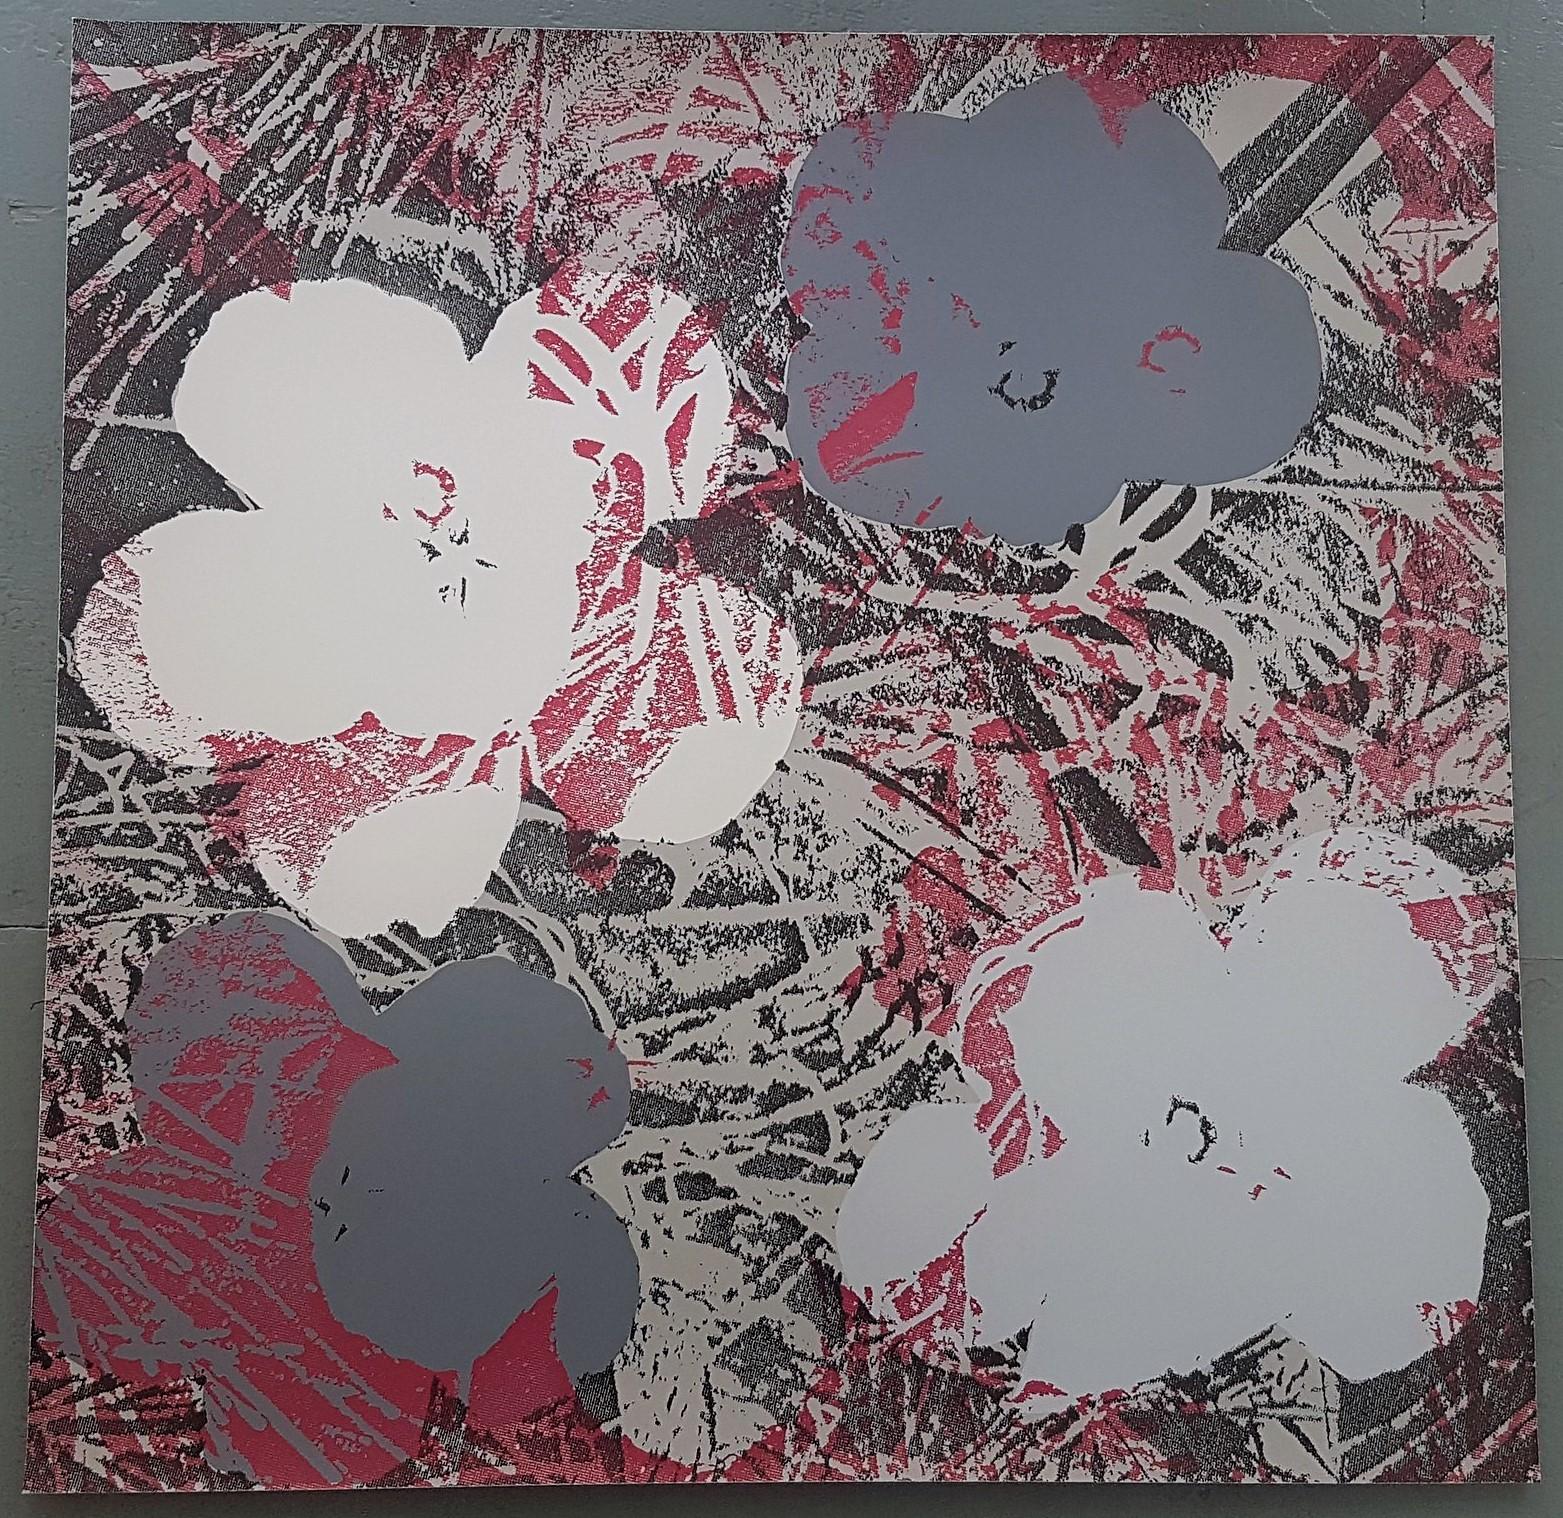 Flowers (Grey and Dark Red Hues - Pop Art) (50% OFF LIST PRICE, LIMITED TIME) - Print by Jurgen Kuhl 